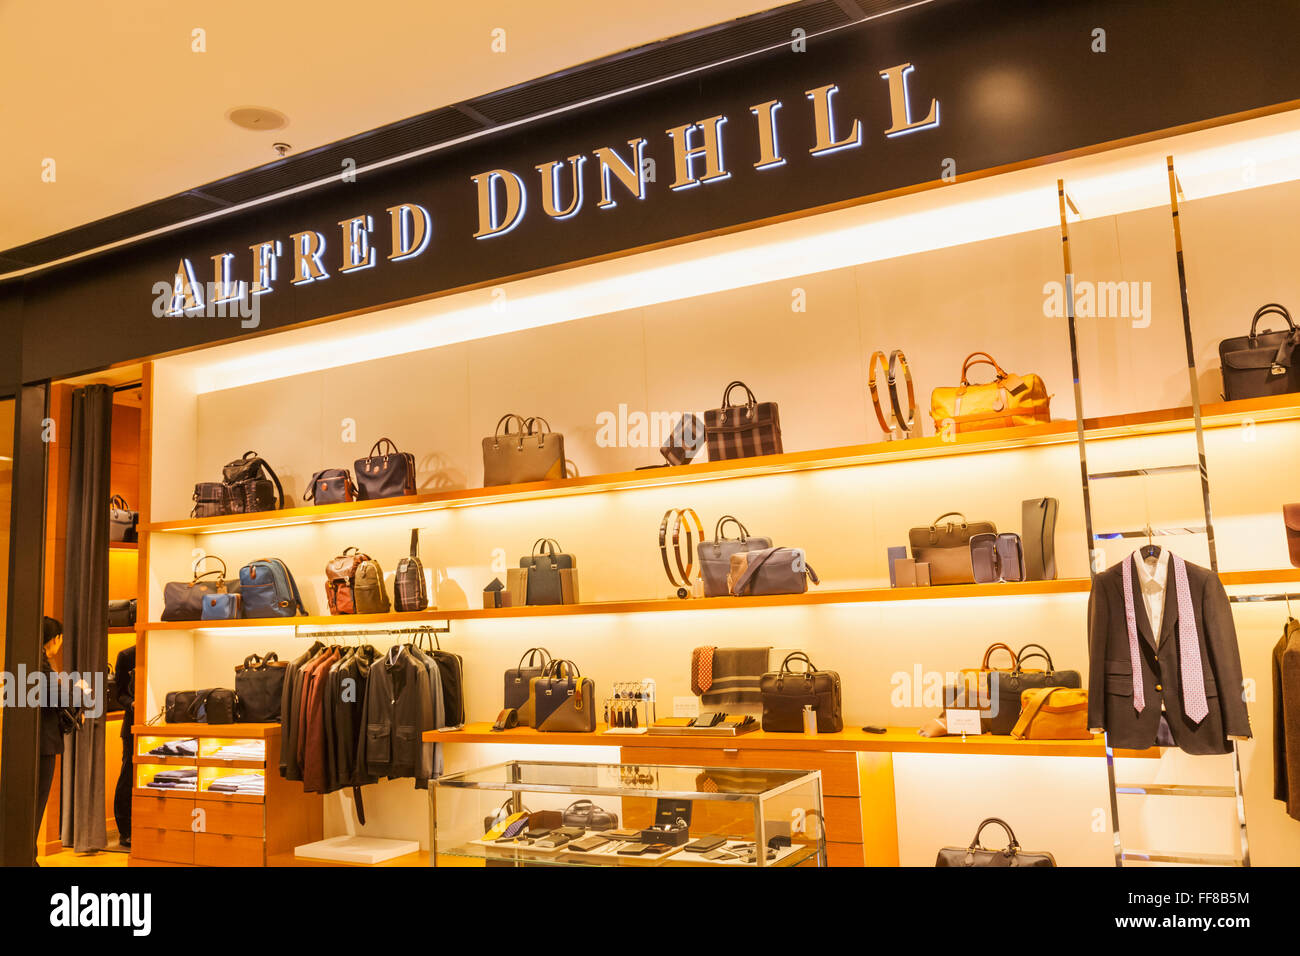 alfred dunhill head office